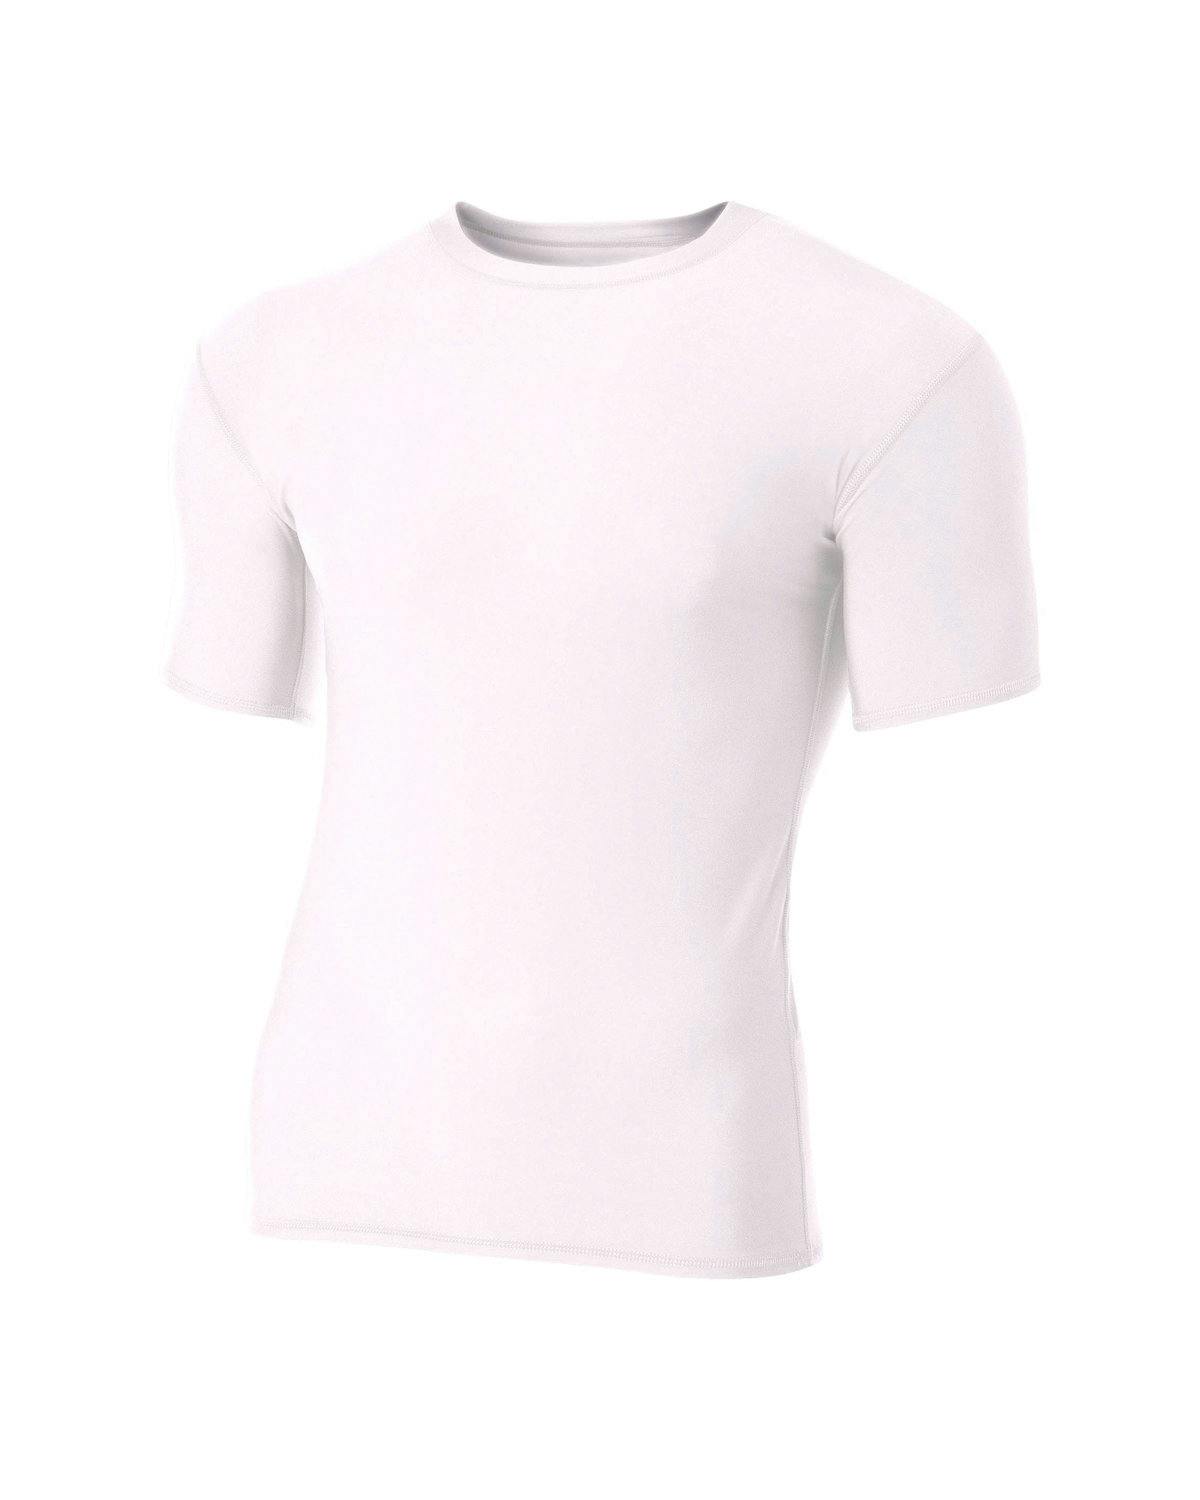 Image for Adult Polyester Spandex Short Sleeve Compression T-Shirt